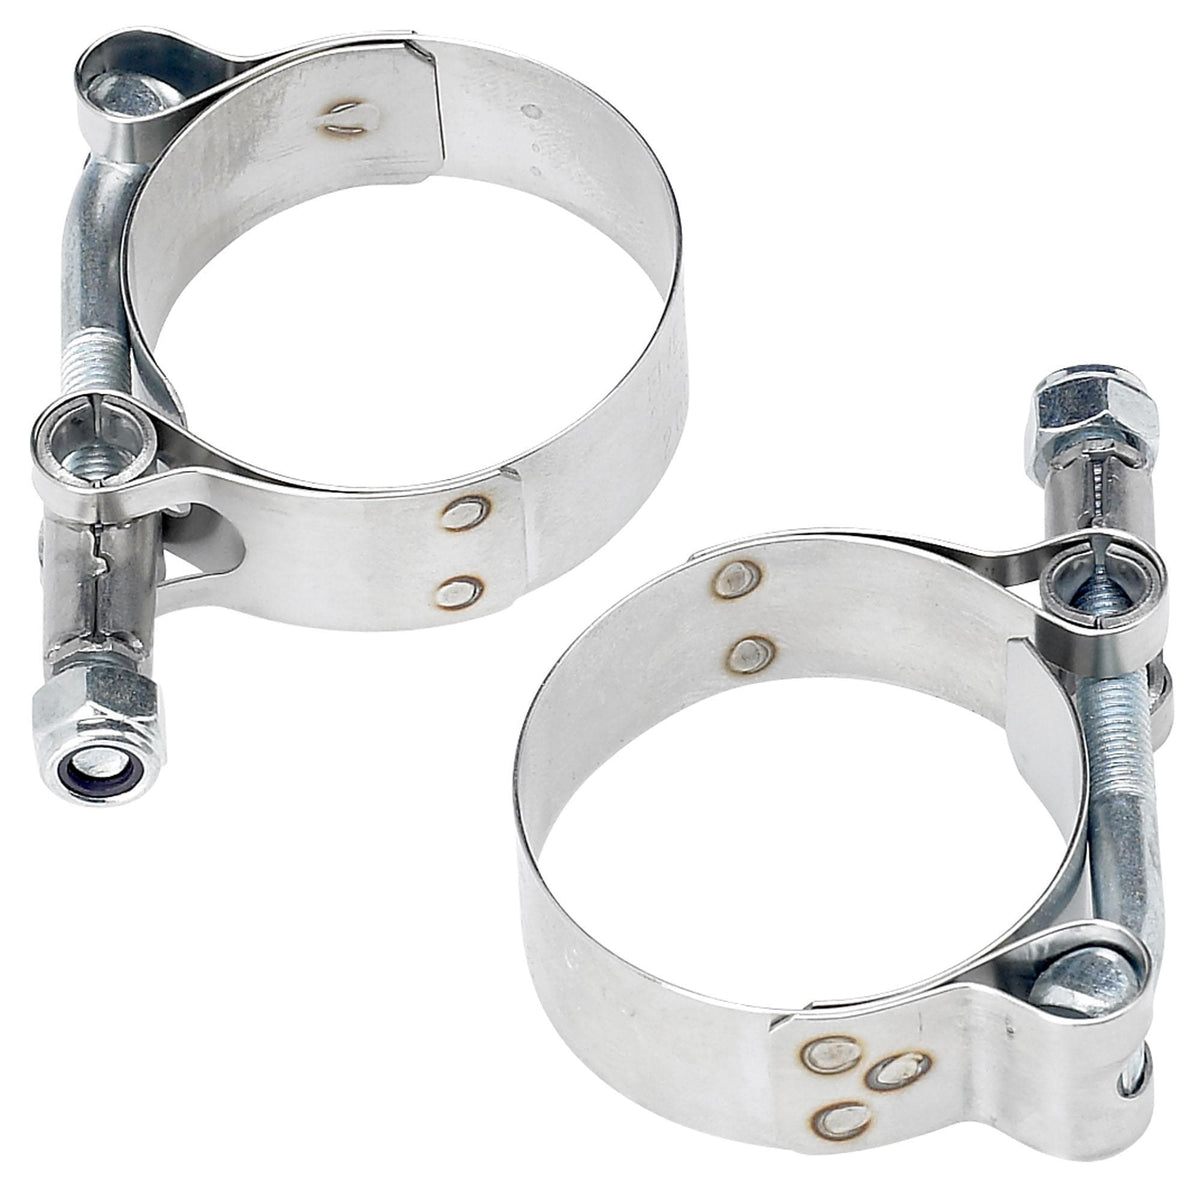 Louis Stainless Exhaust Clamp various sizes